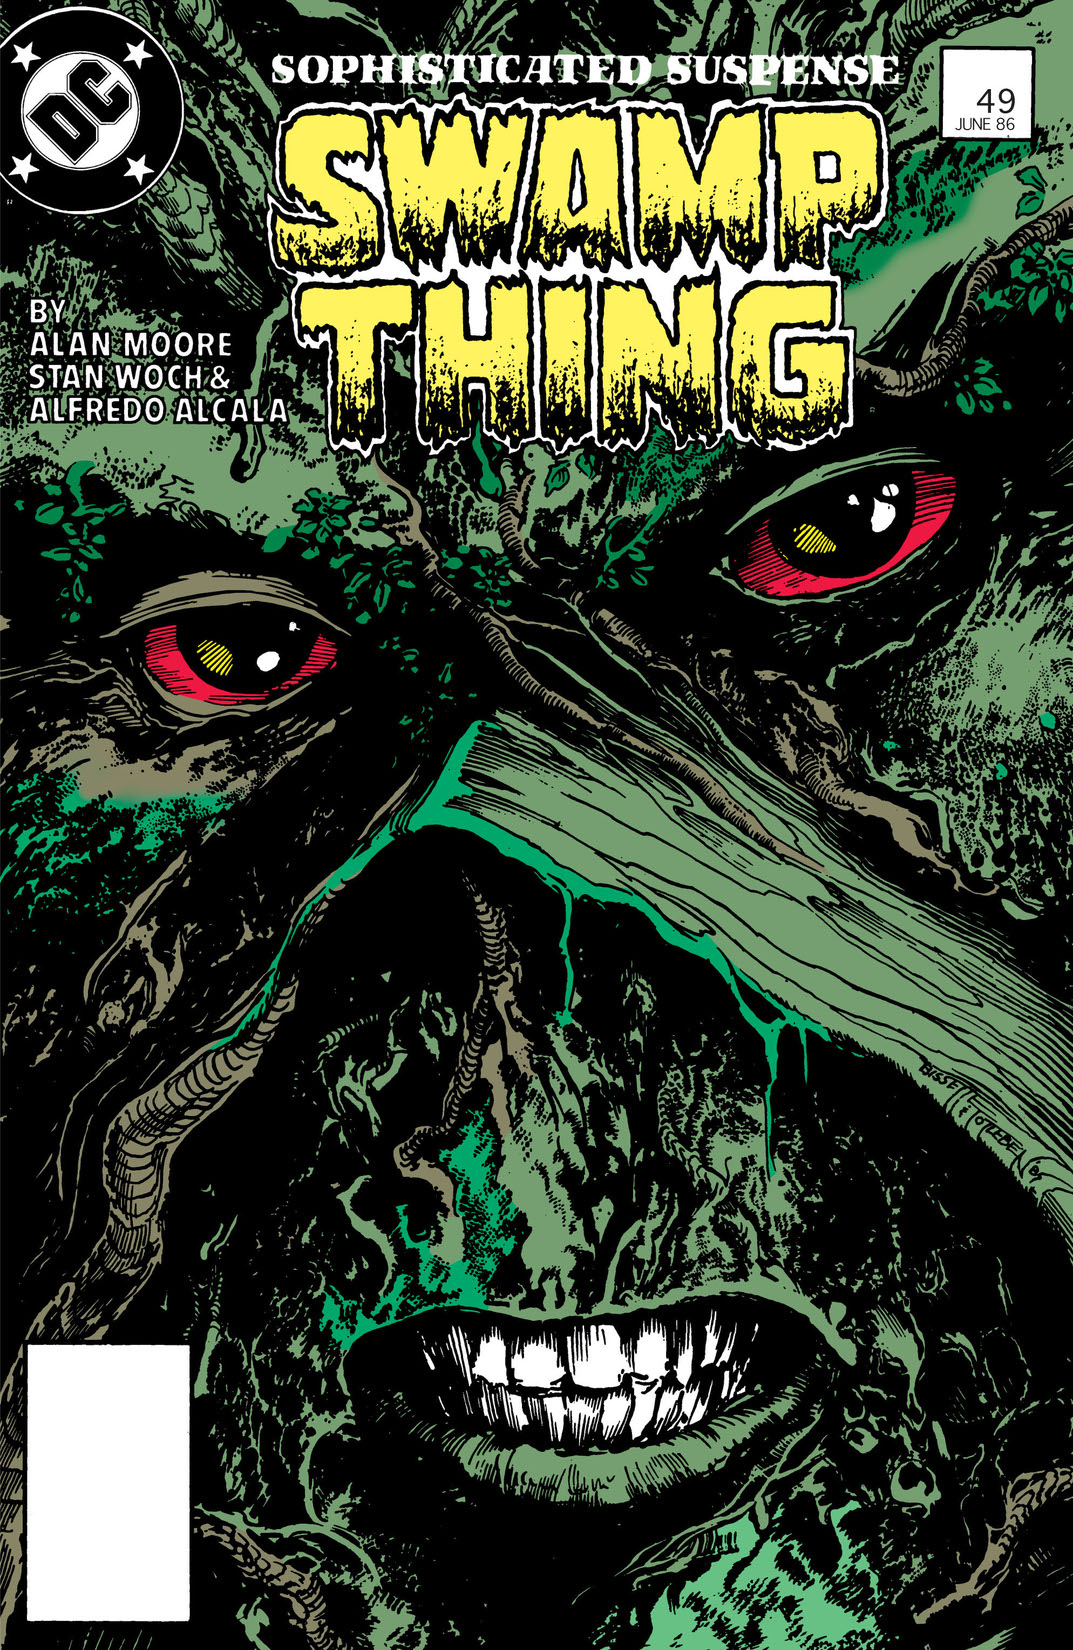 Swamp Thing (1985-) #49 preview images